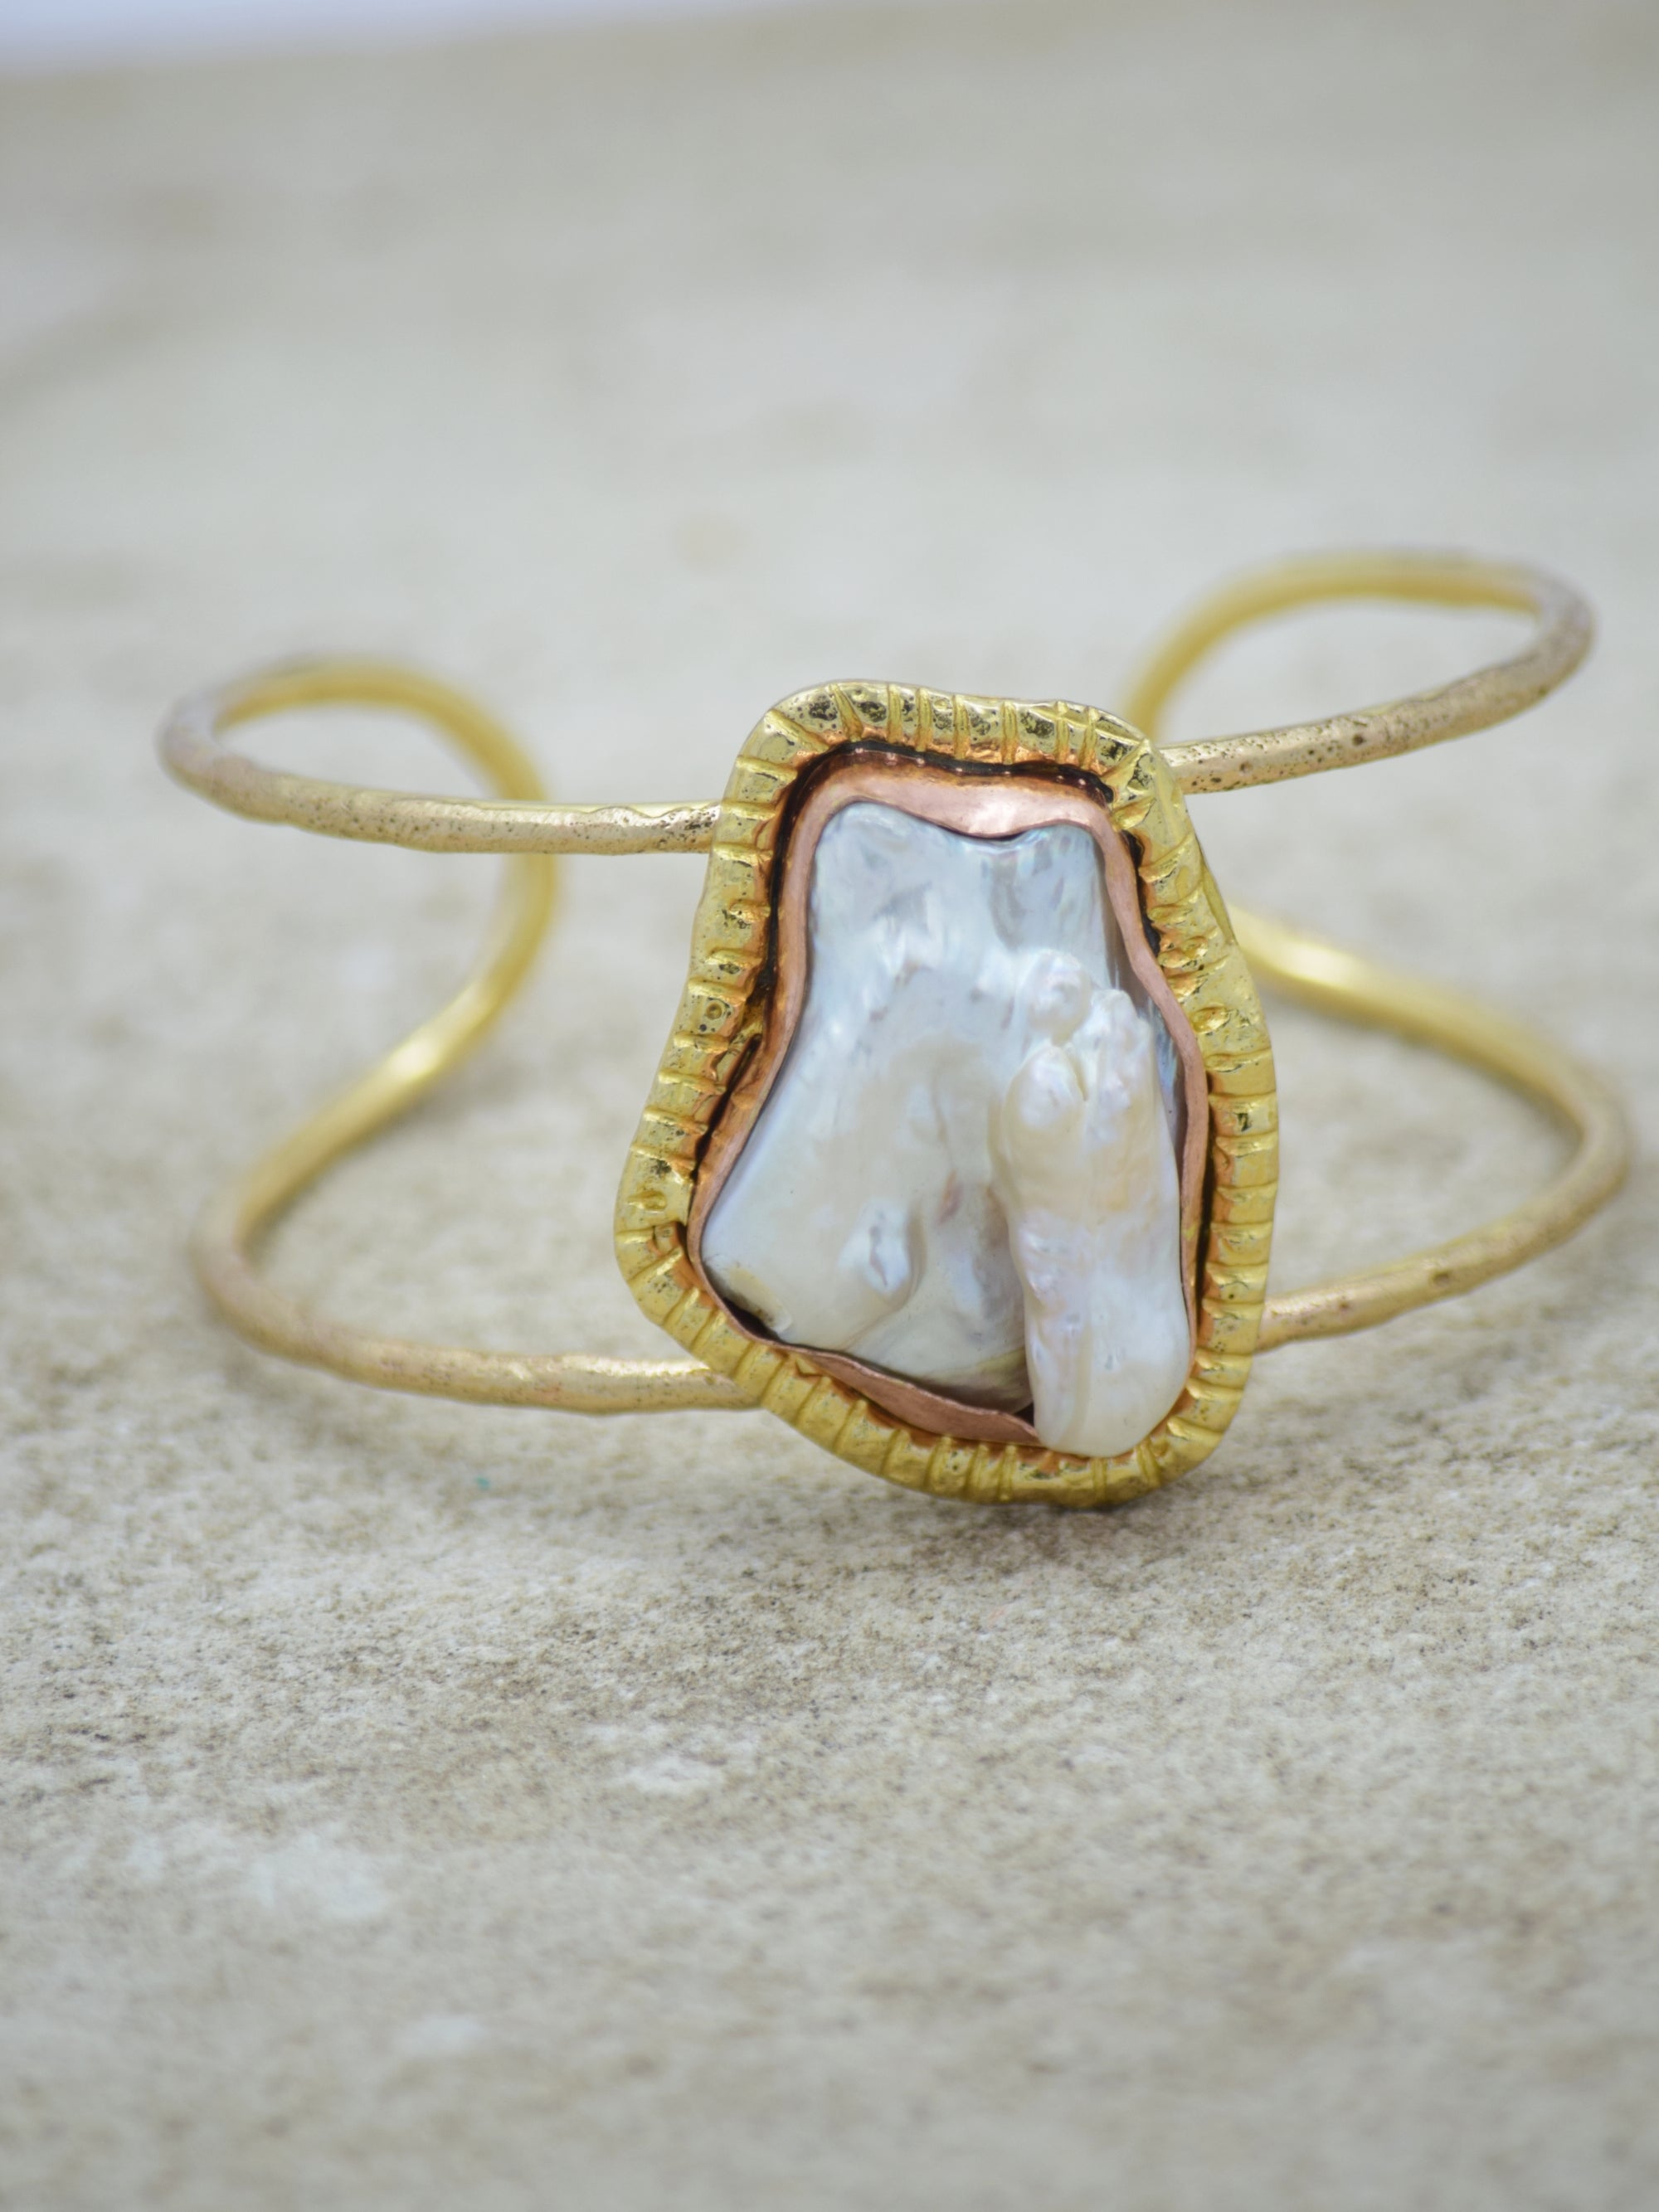 Gold Plated Mother of Pearl Semi Precious Stone Wavy Cuff Bracelet